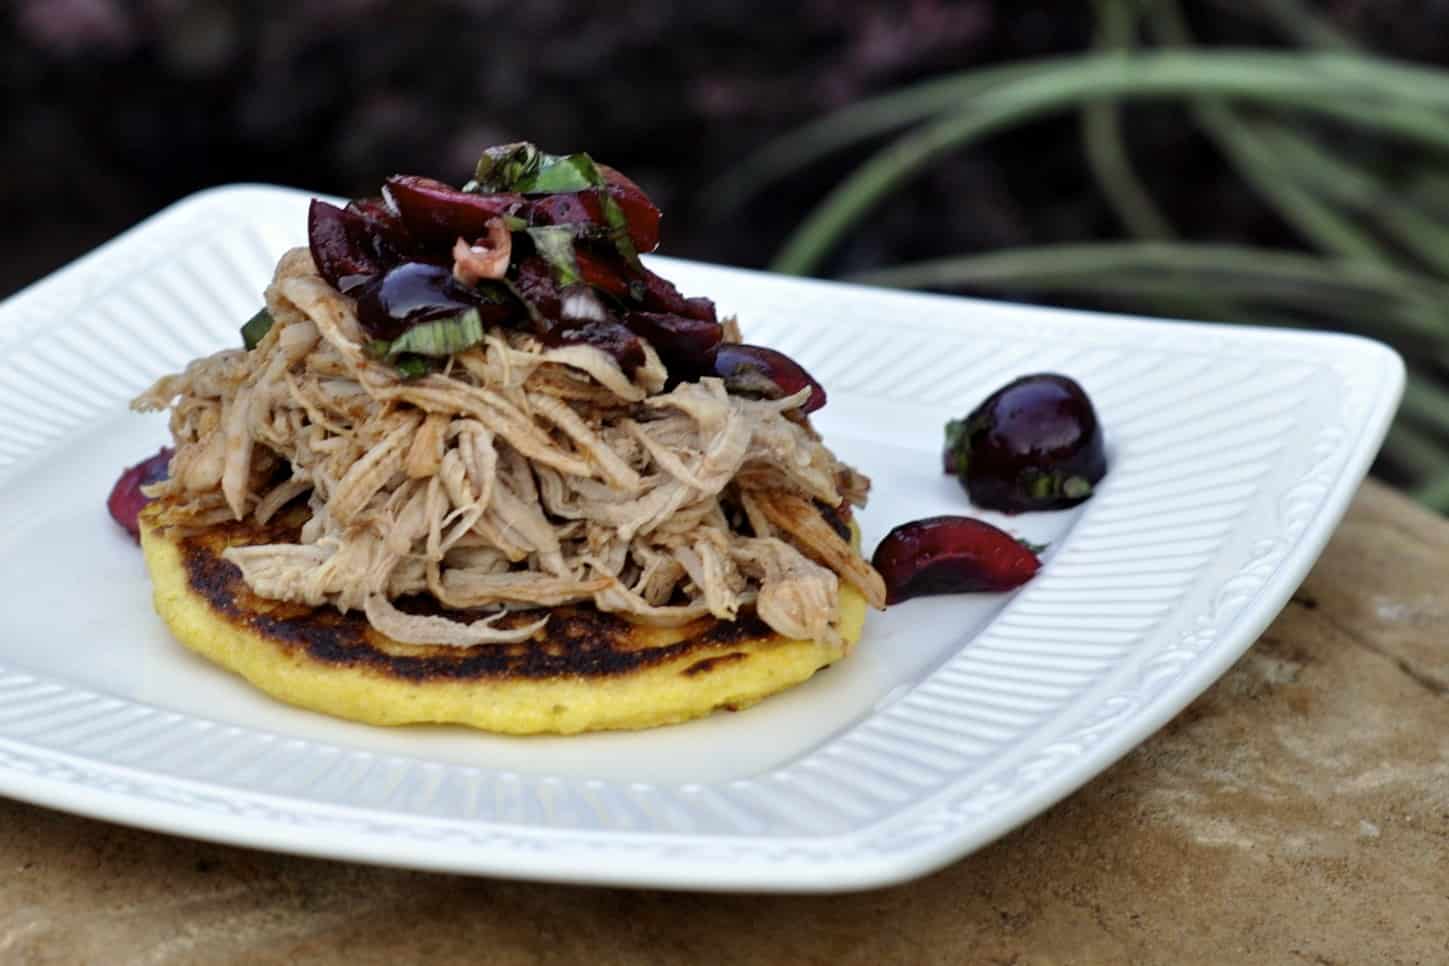 Cornbread Griddle Cakes topped with Pulled Pork Barbecue and Sweet Cherry Salad on a square dinner plate.